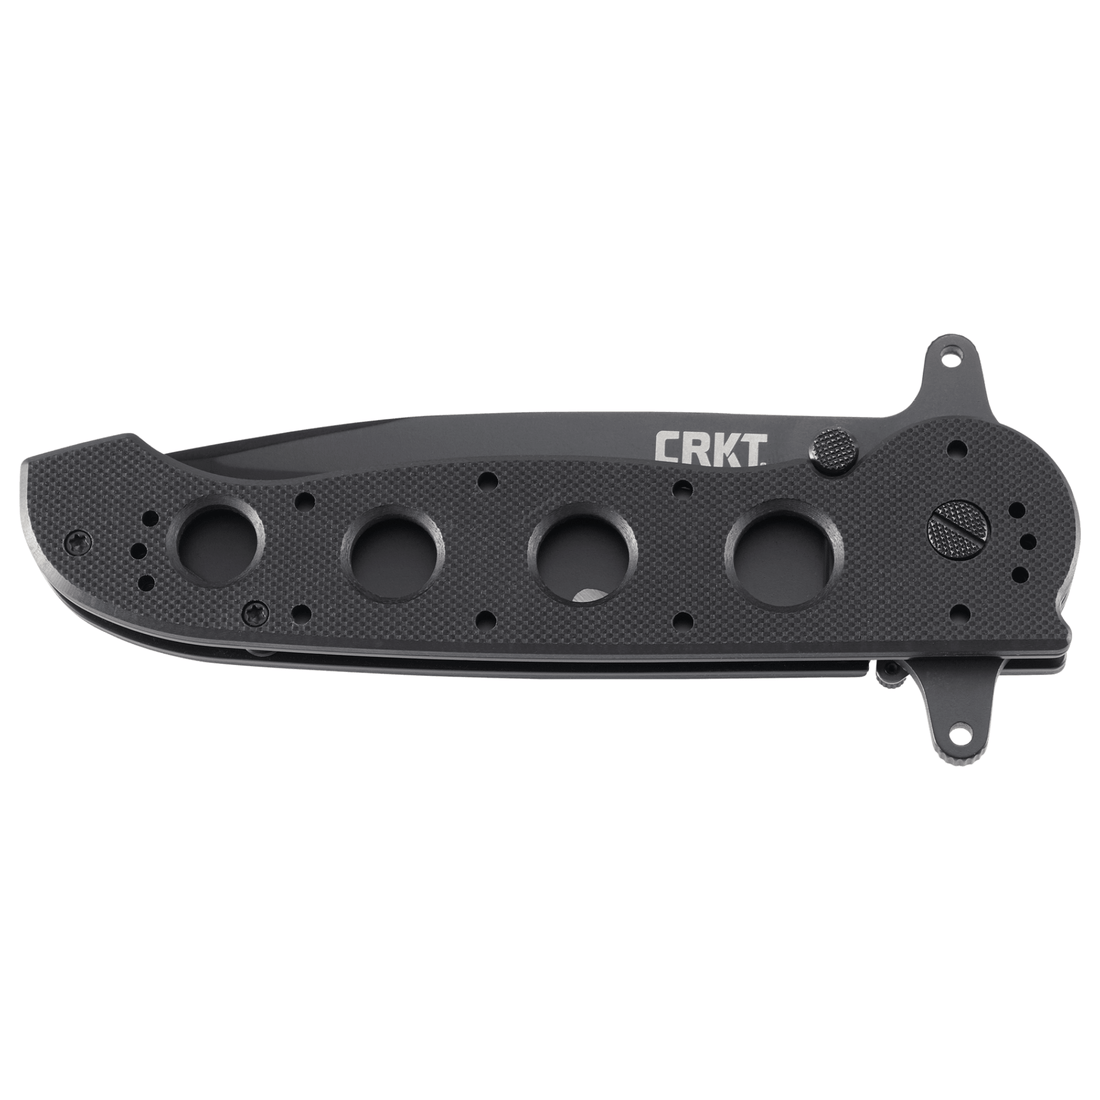 Supplies - EDC - Knives - CRKT M16-14SFG Folding Knife - Special Forces Tanto, Black